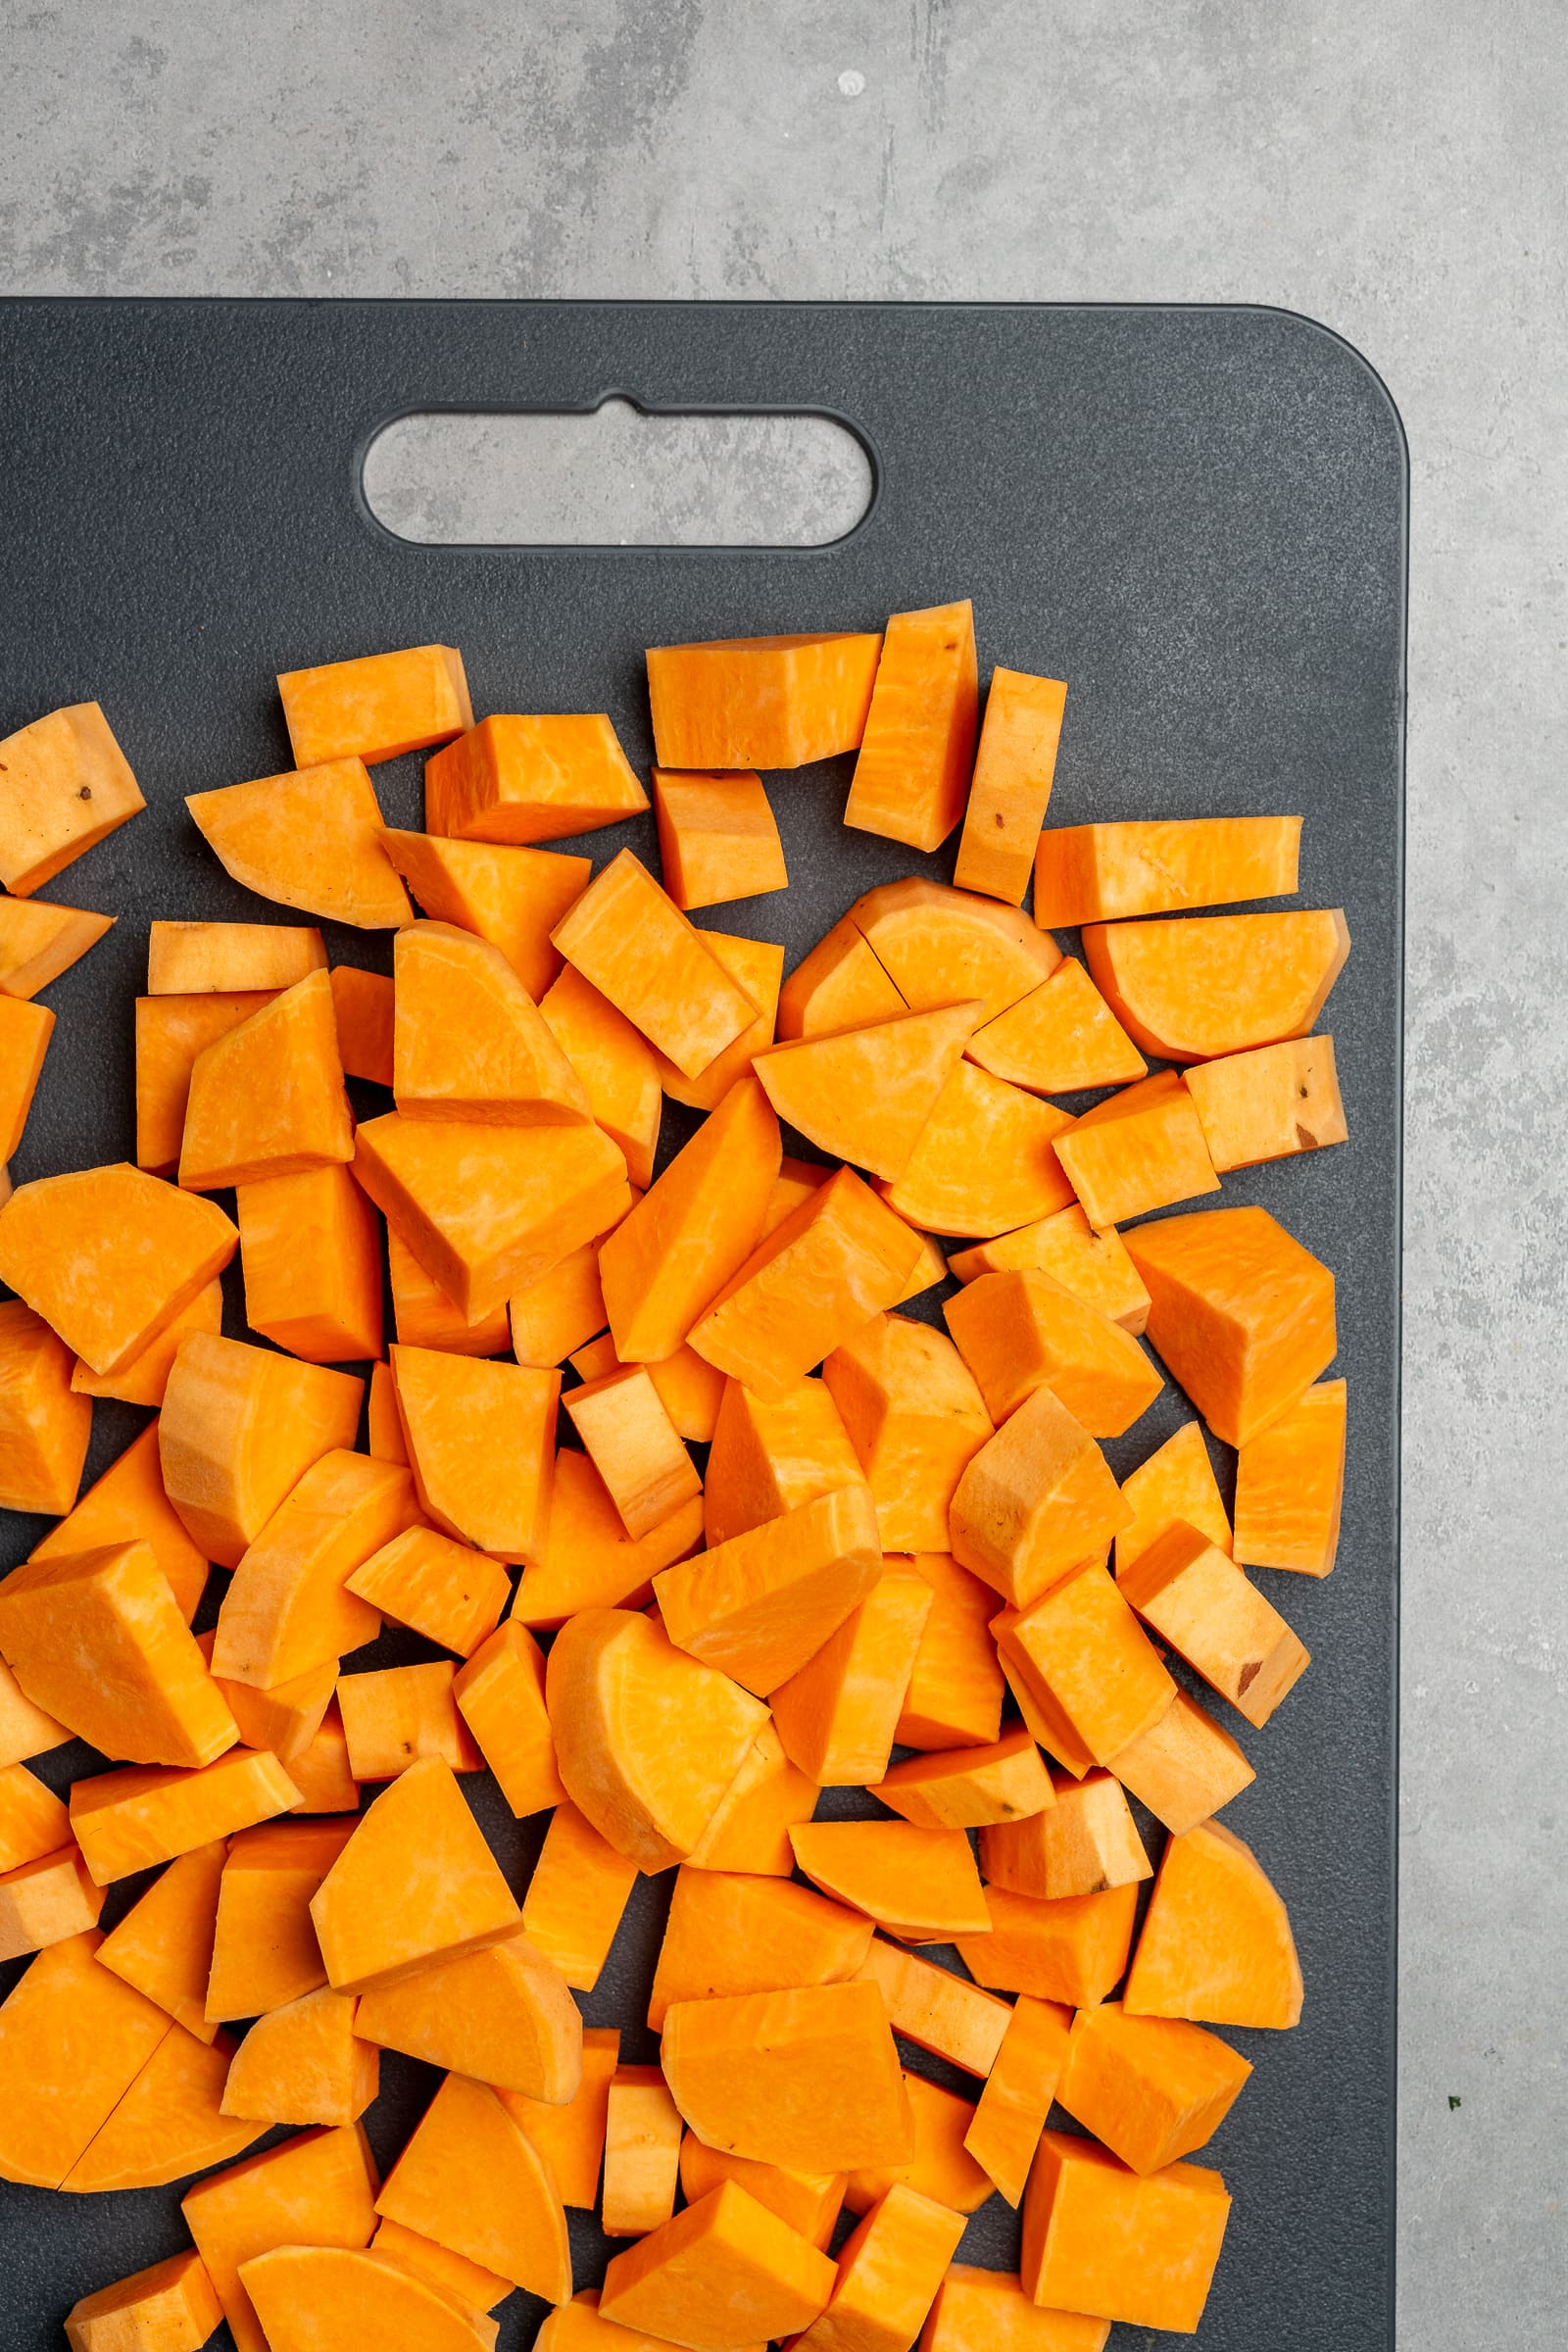 Sweet potatoes diced on a gray cutting board.